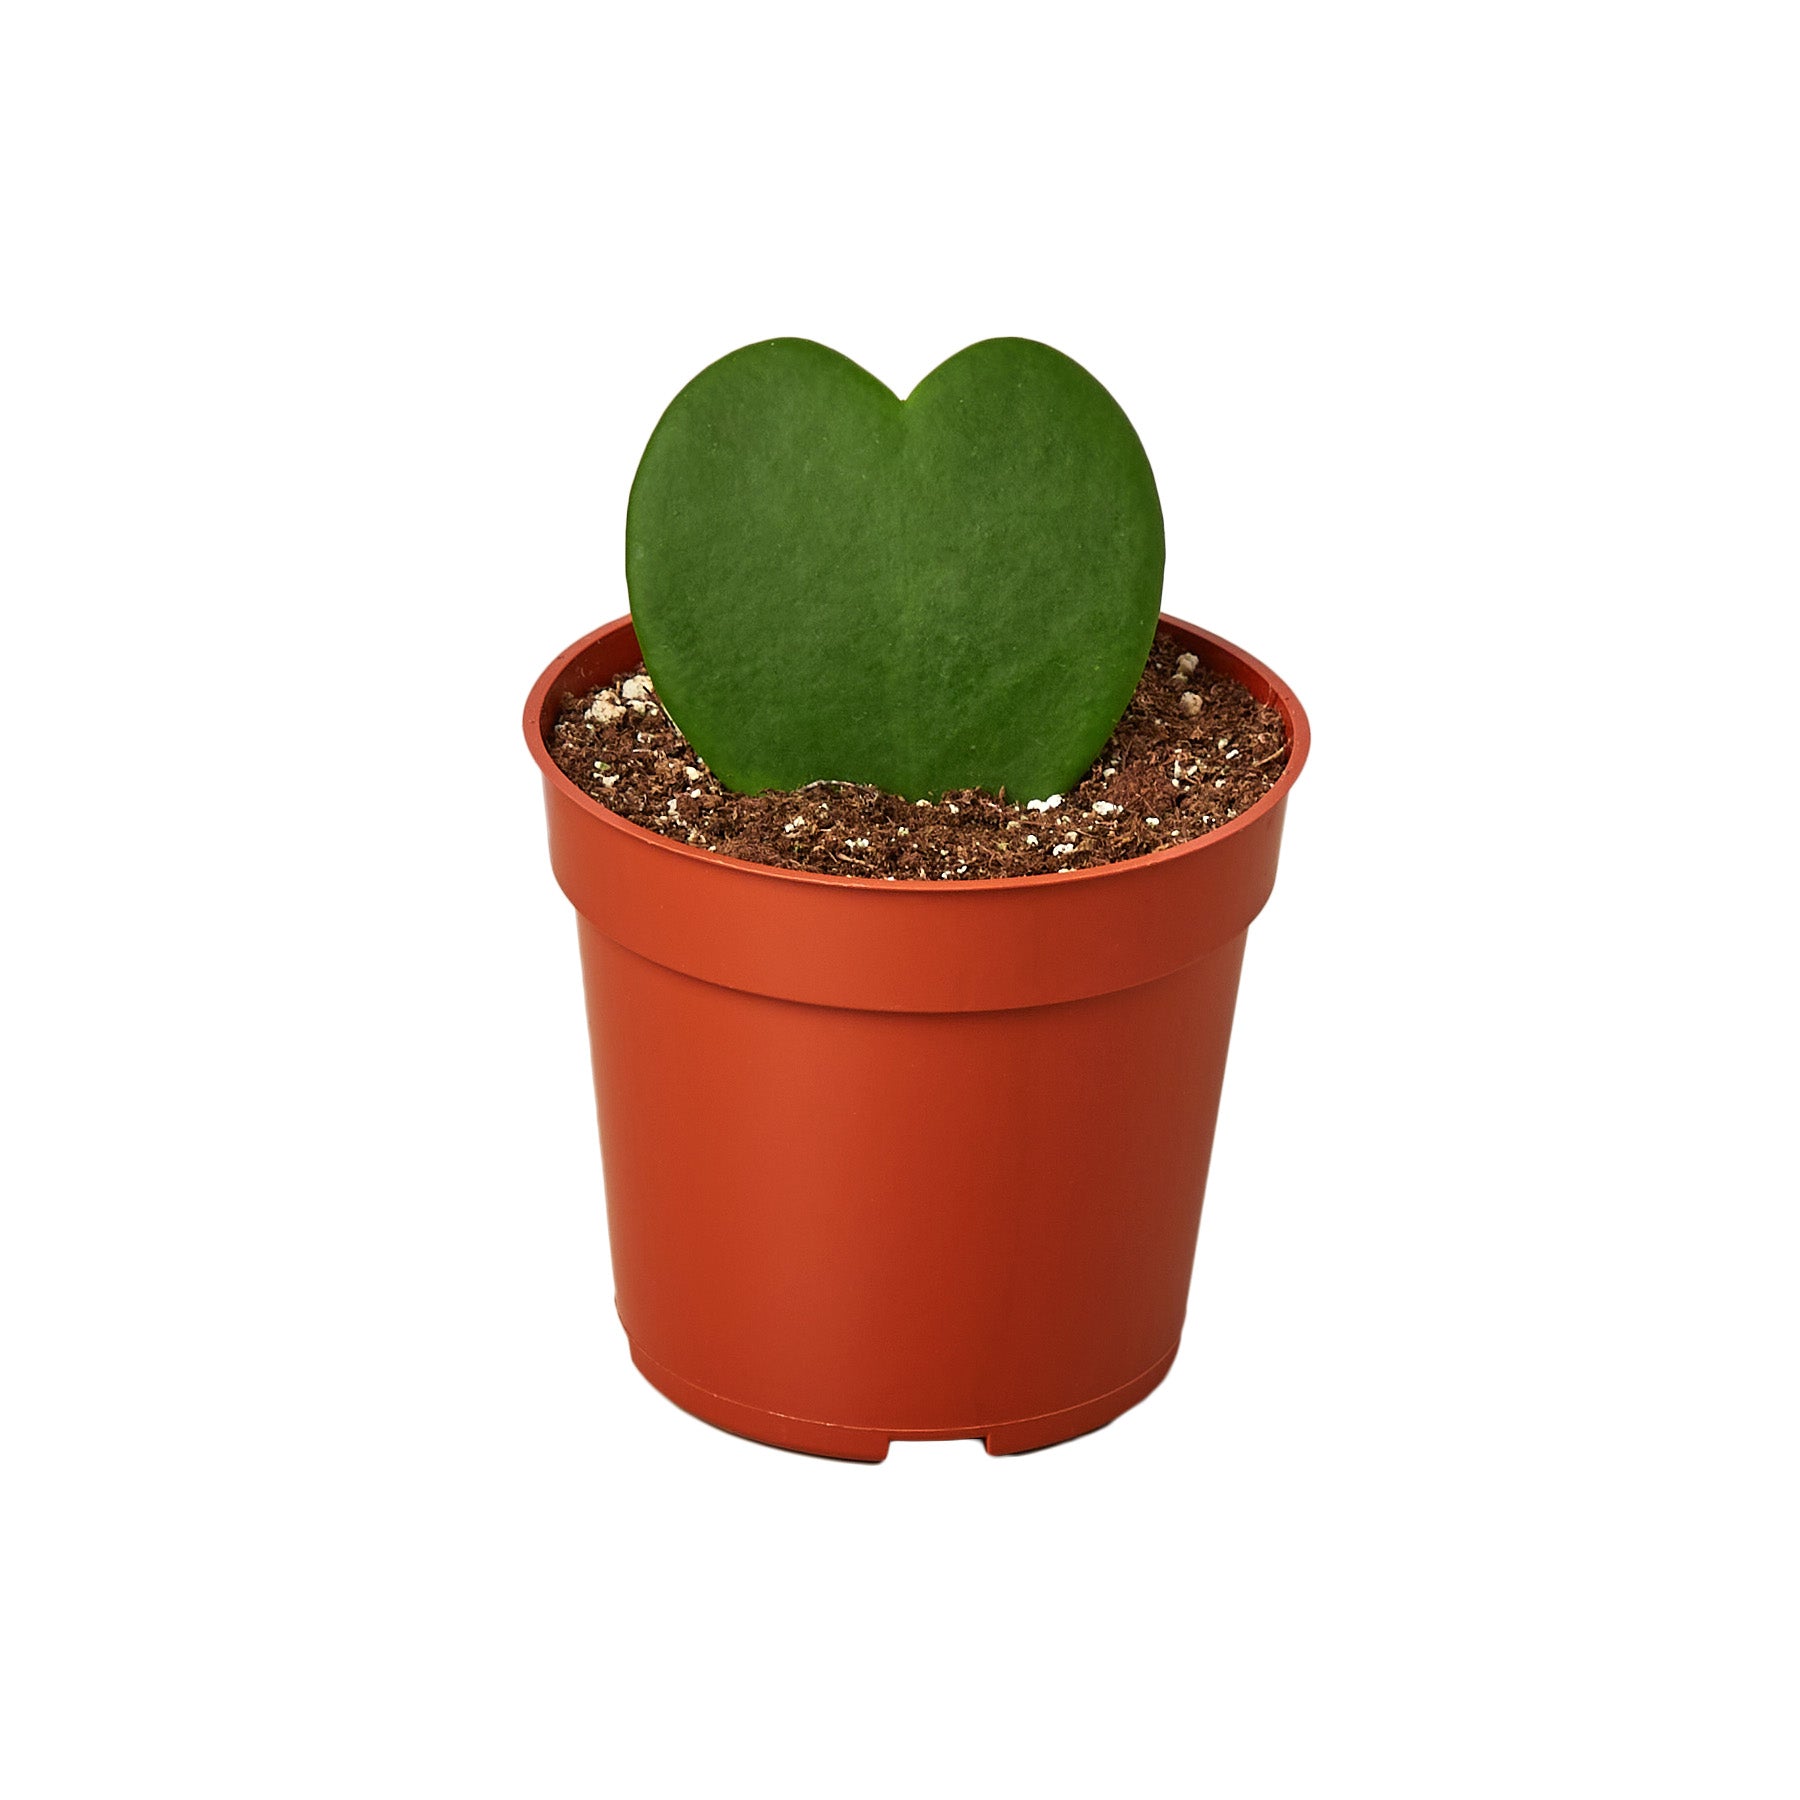 In search of the best garden nursery near me, you'll find a unique heart-shaped cactus plant displayed elegantly in a vibrant red pot.